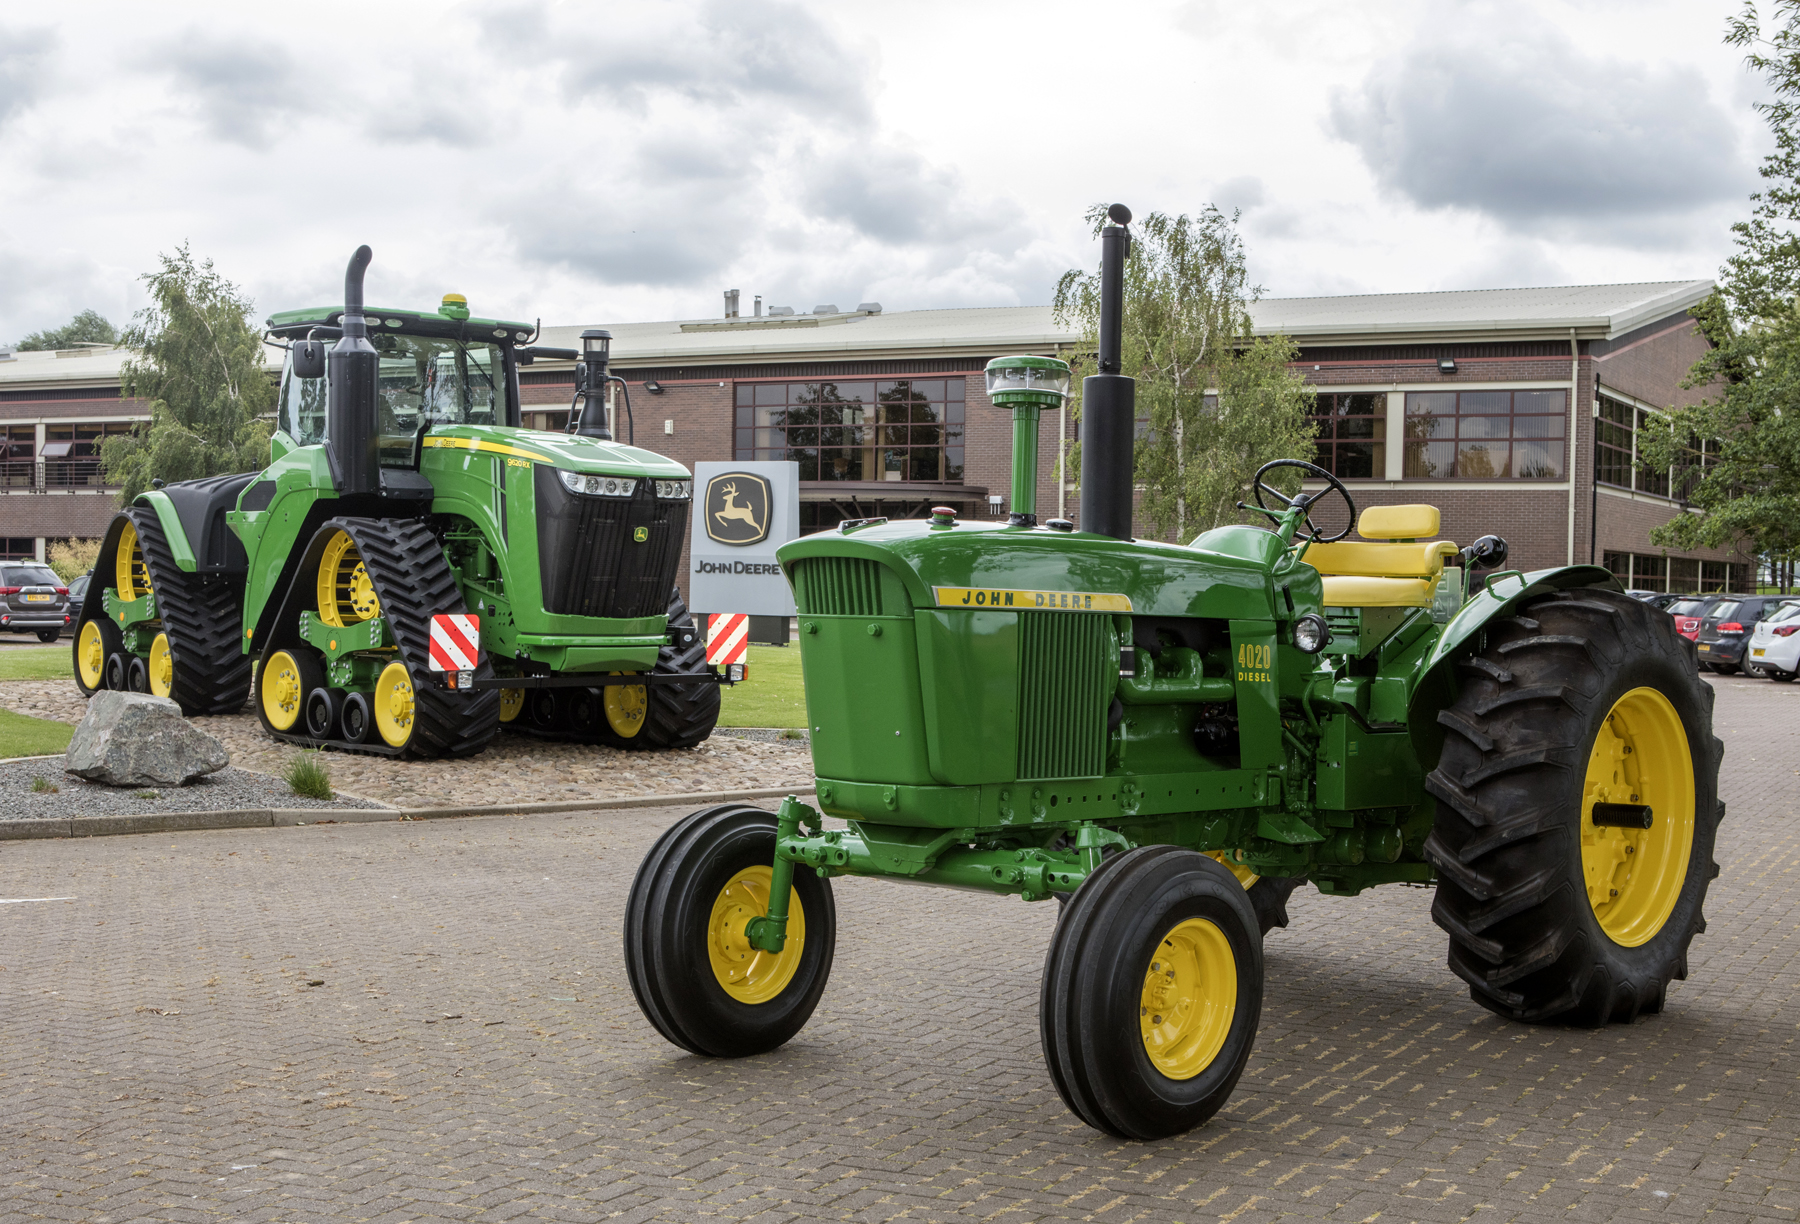 Fifty things to see and do at John Deere's 50th birthday.